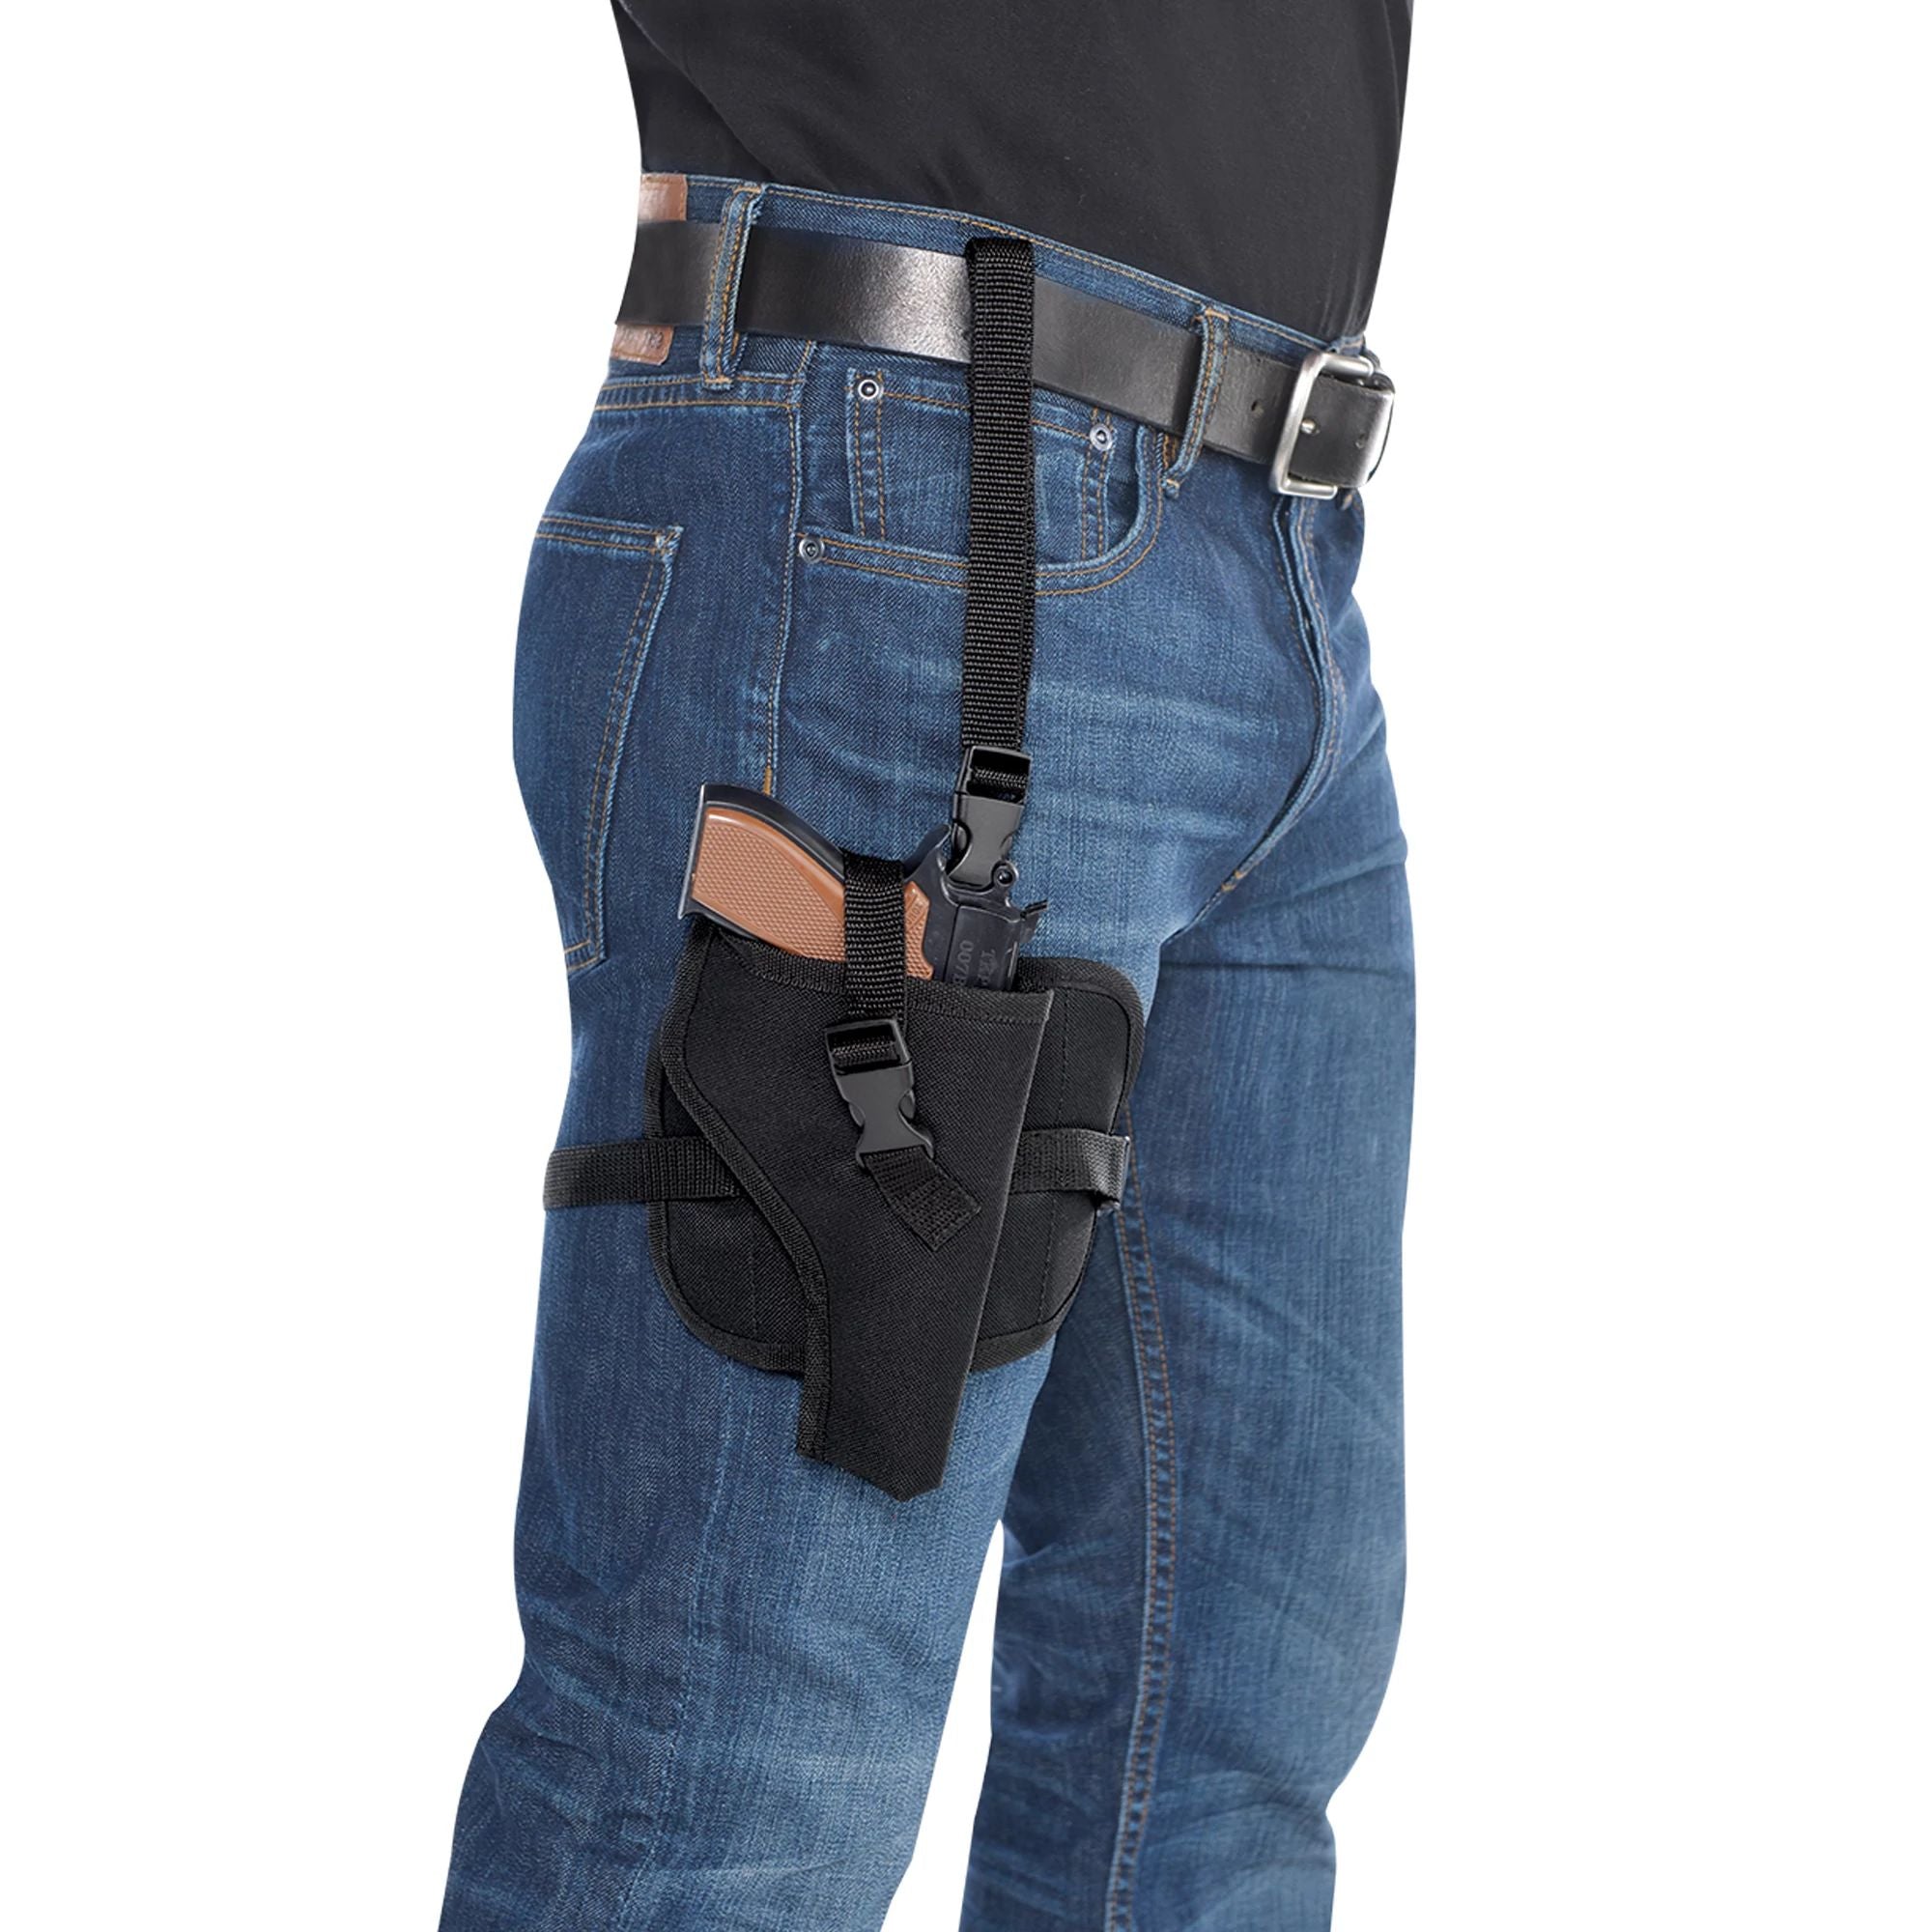 Amscan COSTUMES: ACCESSORIES Deluxe Leg Holster - Adult